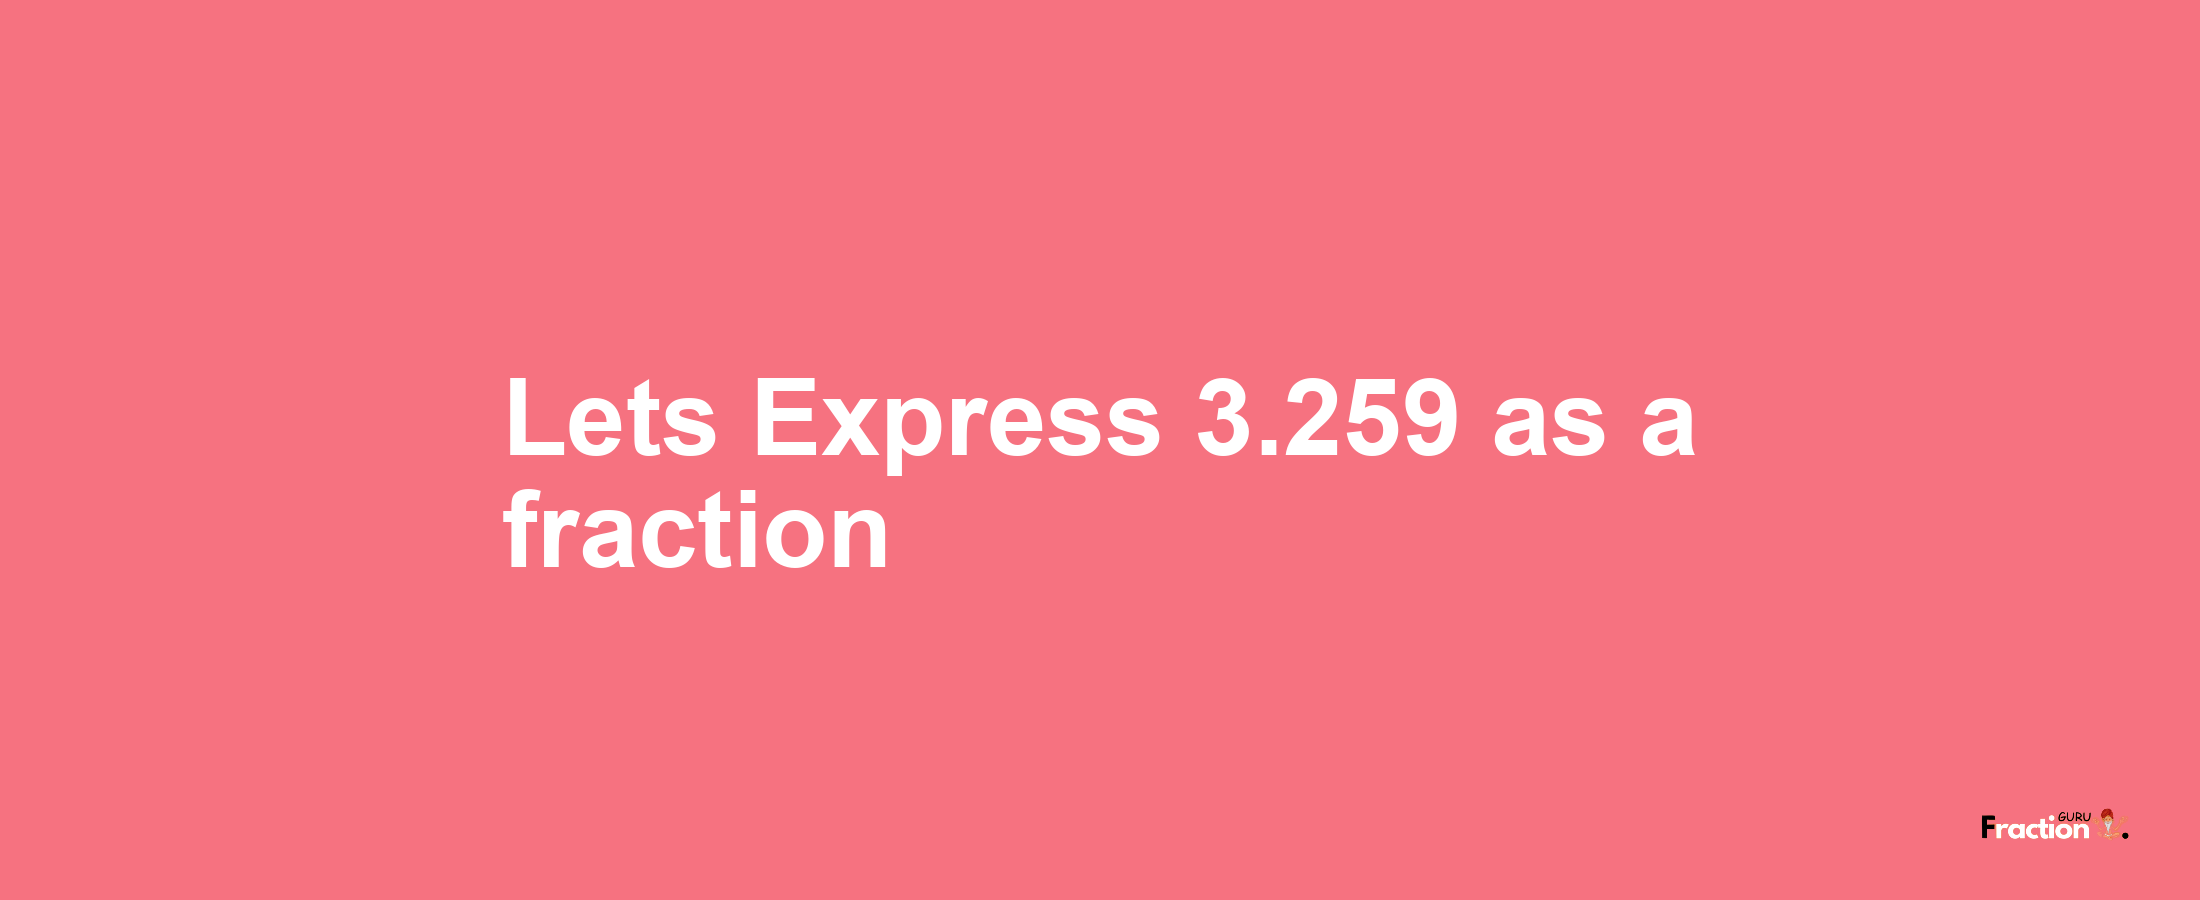 Lets Express 3.259 as afraction